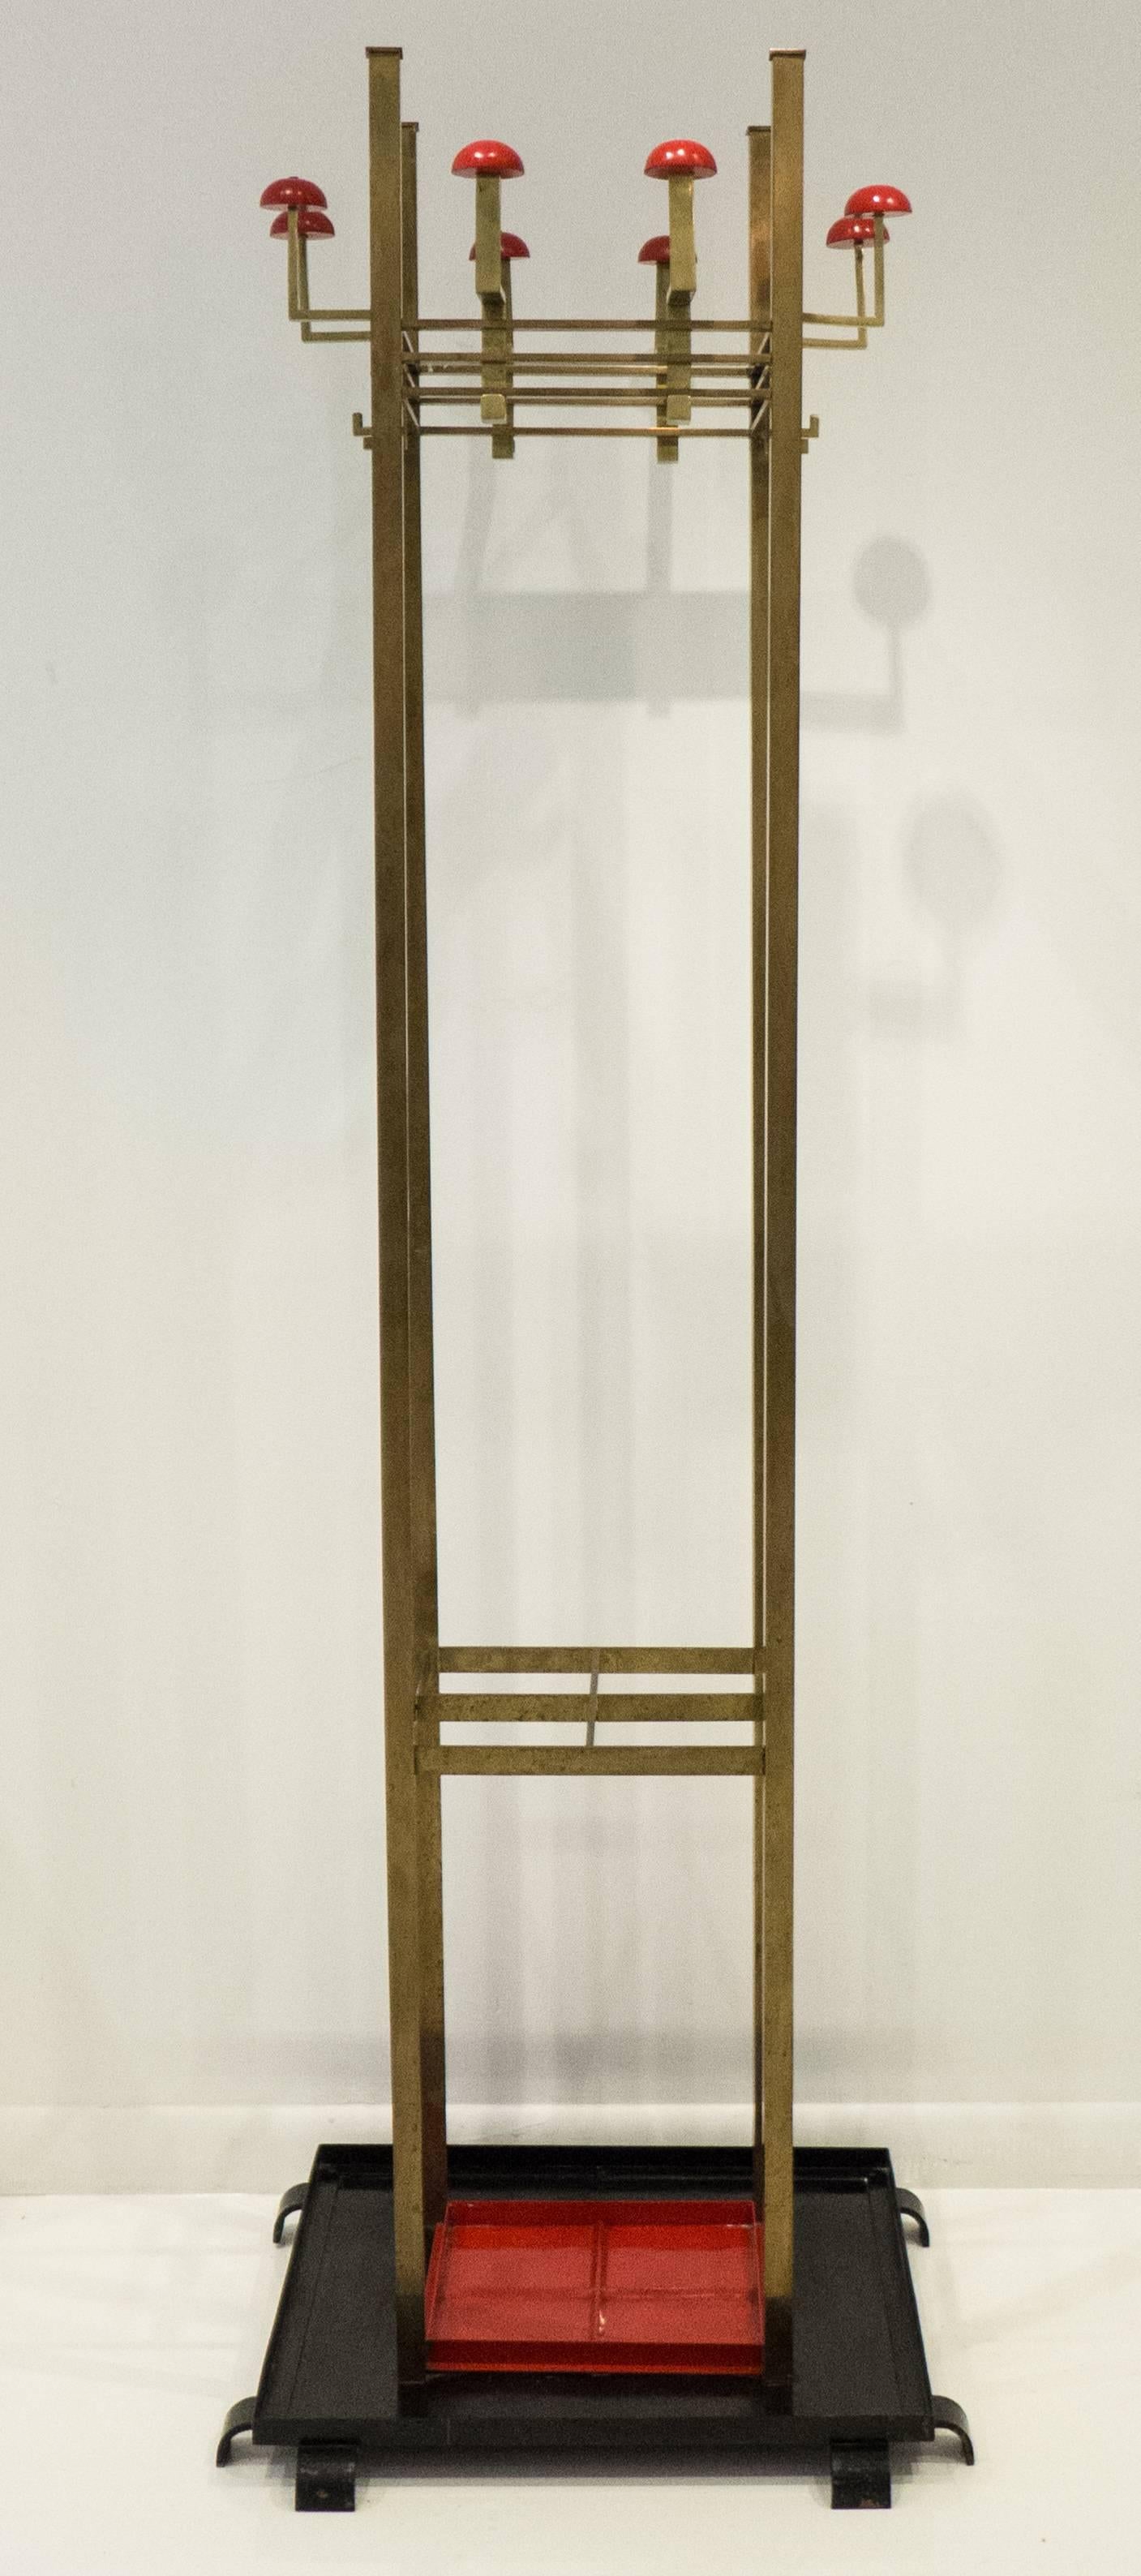 Tall Secessionist coat stand or hall organizer of brass, painted steel, and painted wood. Produced by S.A. Loevy in Berlin, circa 1915. S.A. Loevy was founded in 1885 as a bronze foundry specializing in art casting. The company evolved to produce a